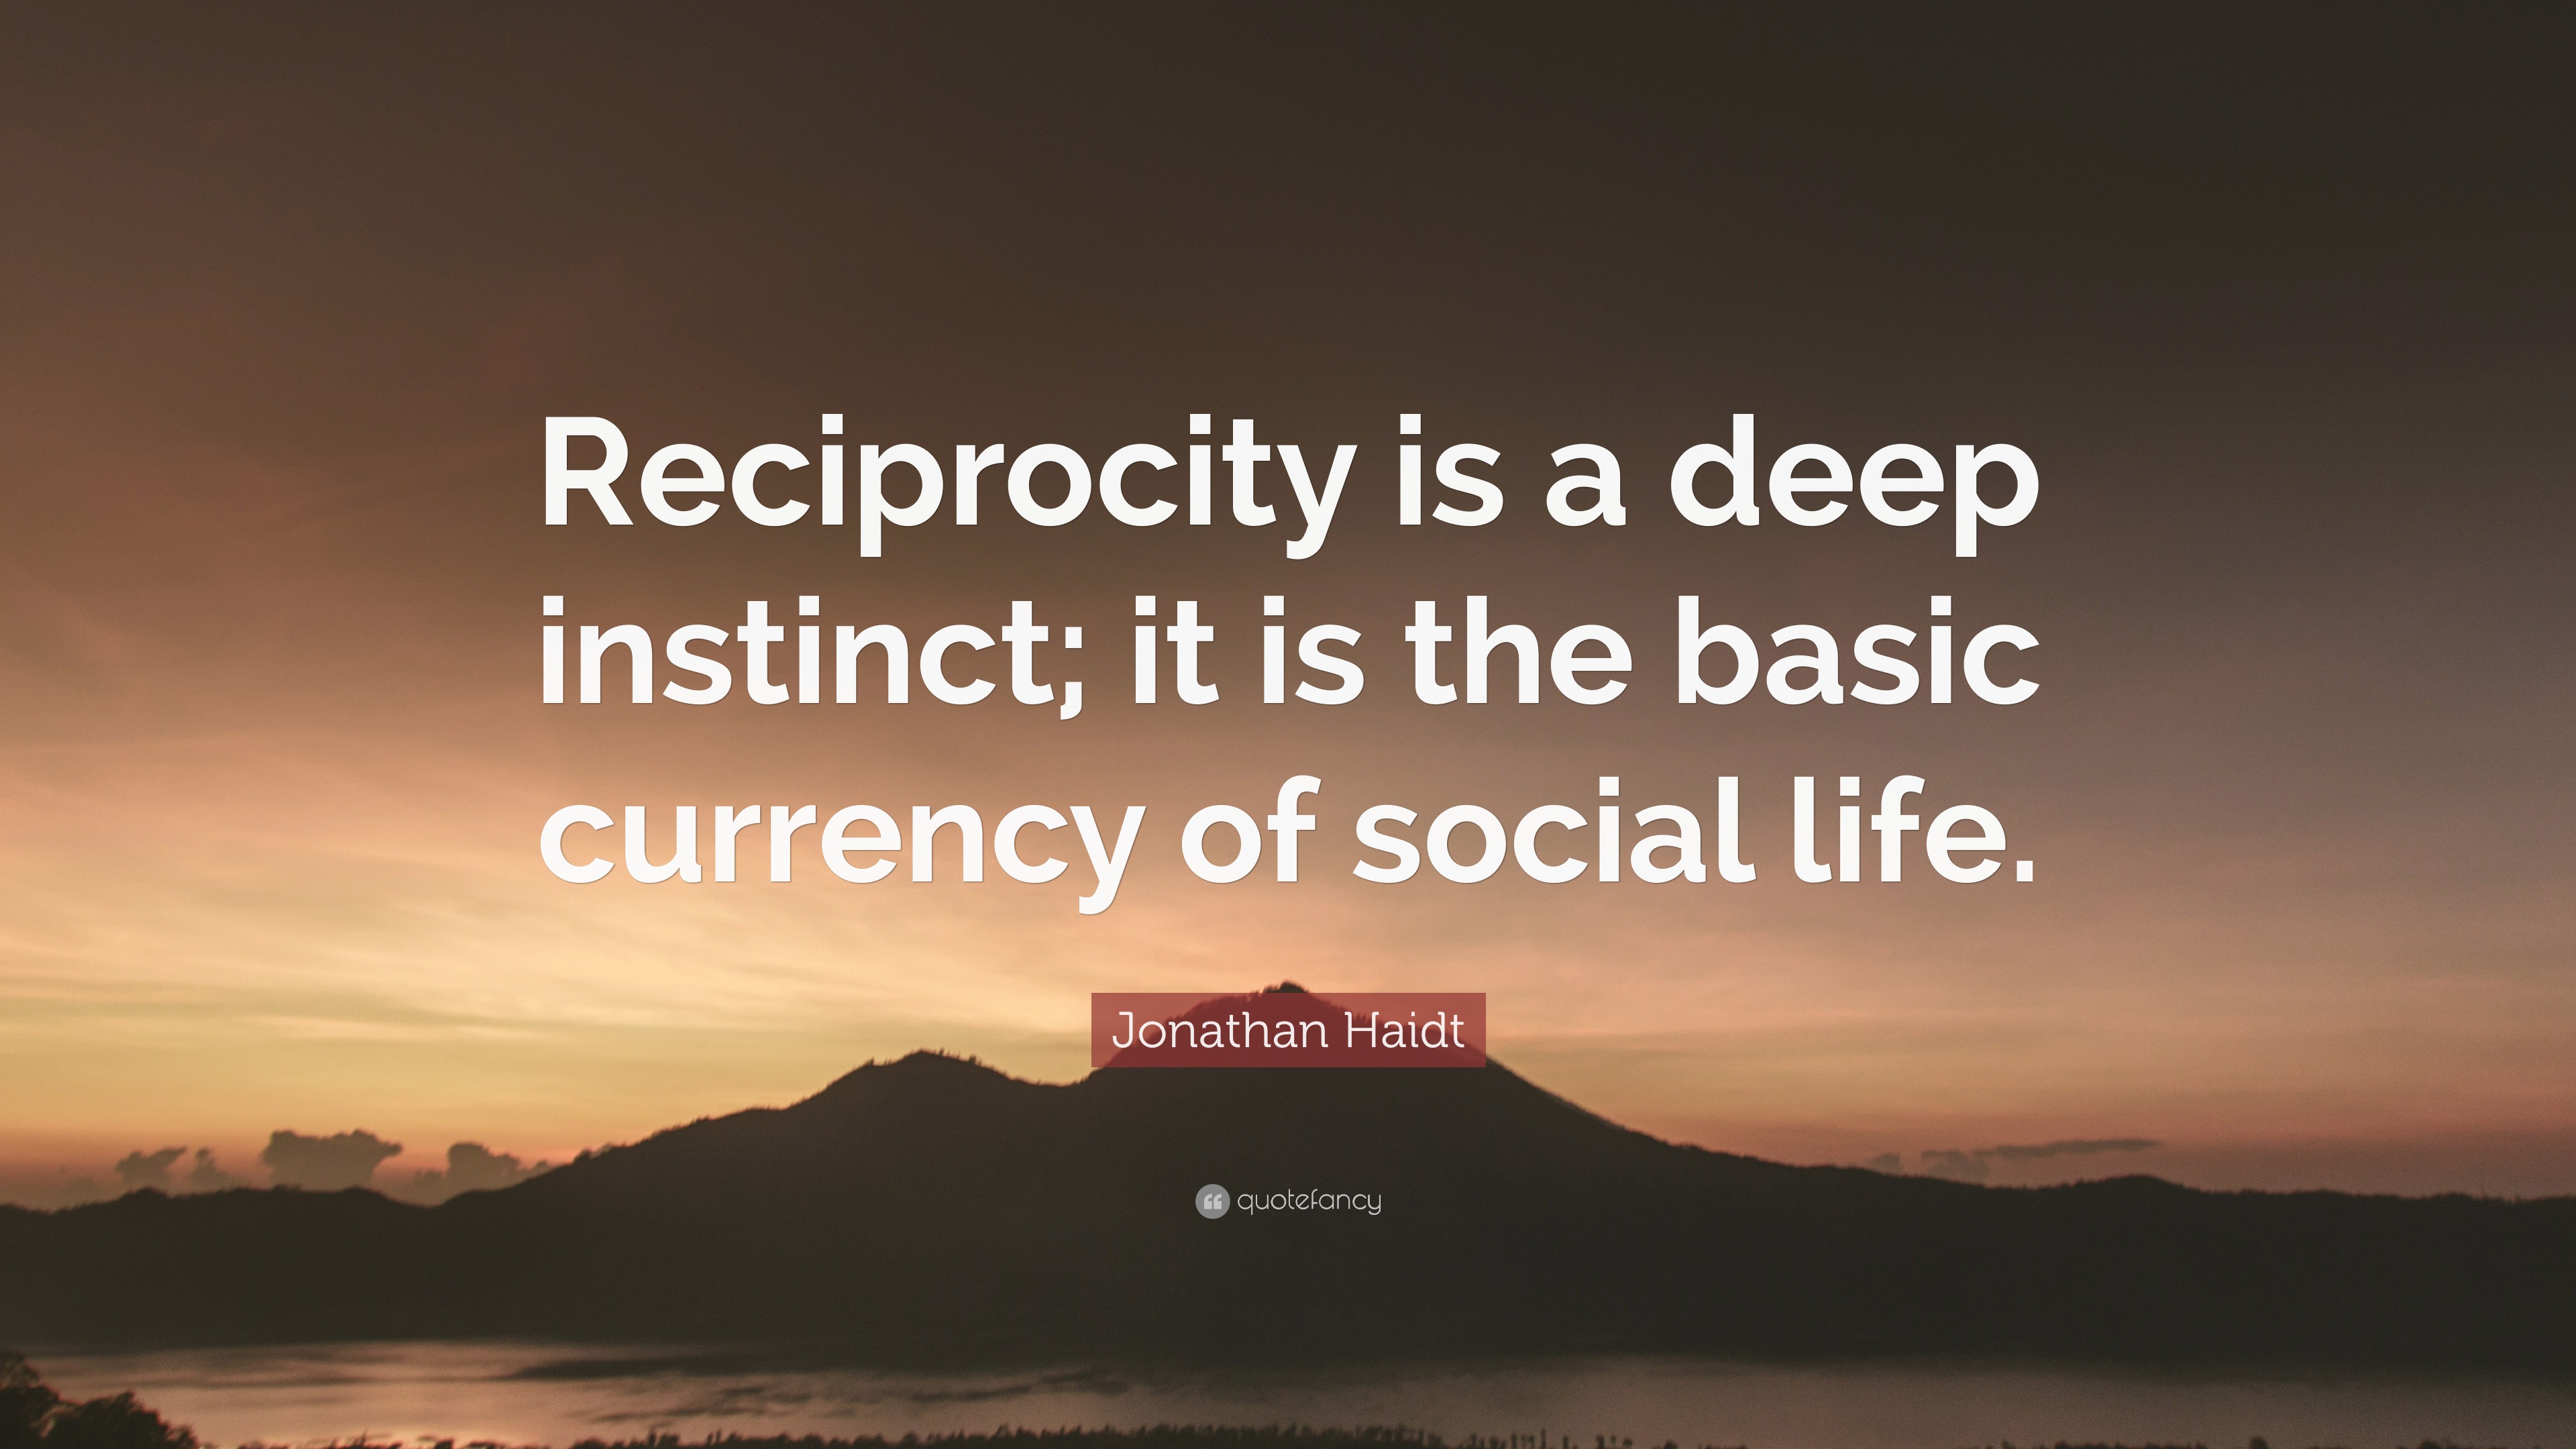 Jonathan Haidt Quote: “Reciprocity is a deep instinct; it is the basic